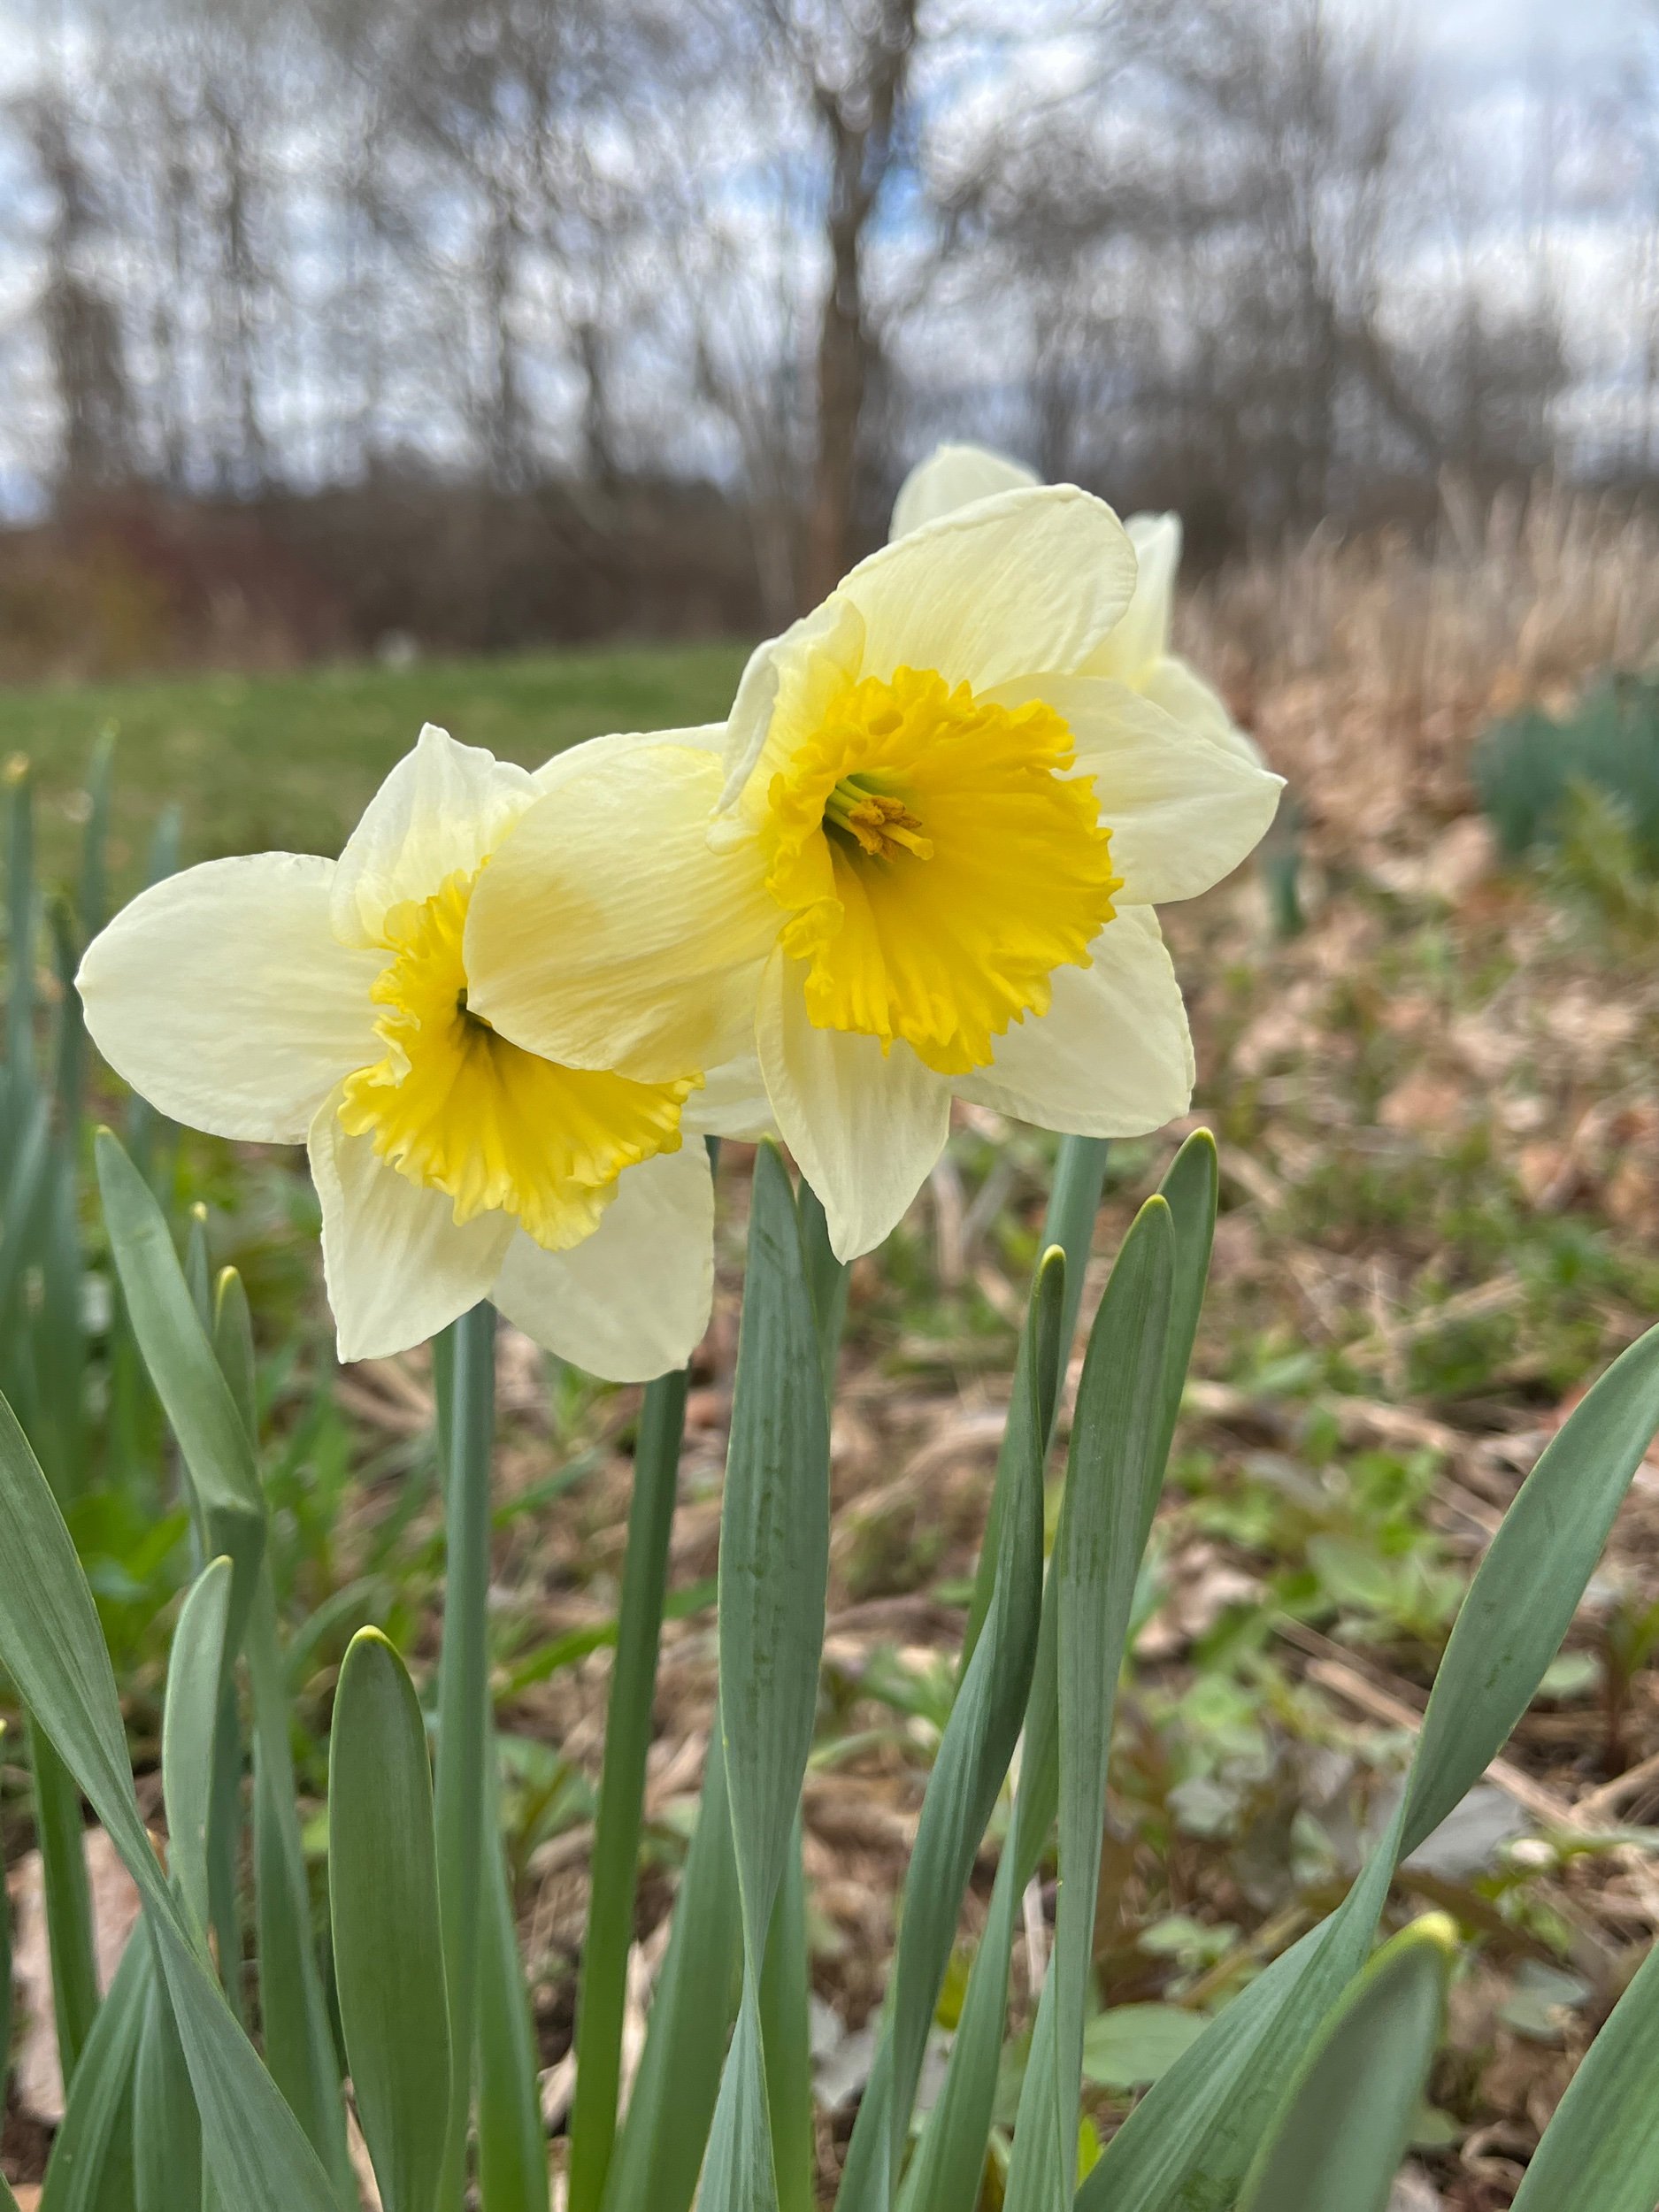  Daffodils are finally emerging in the north country. It has been so warm that they feel late, but they are always right on time. 